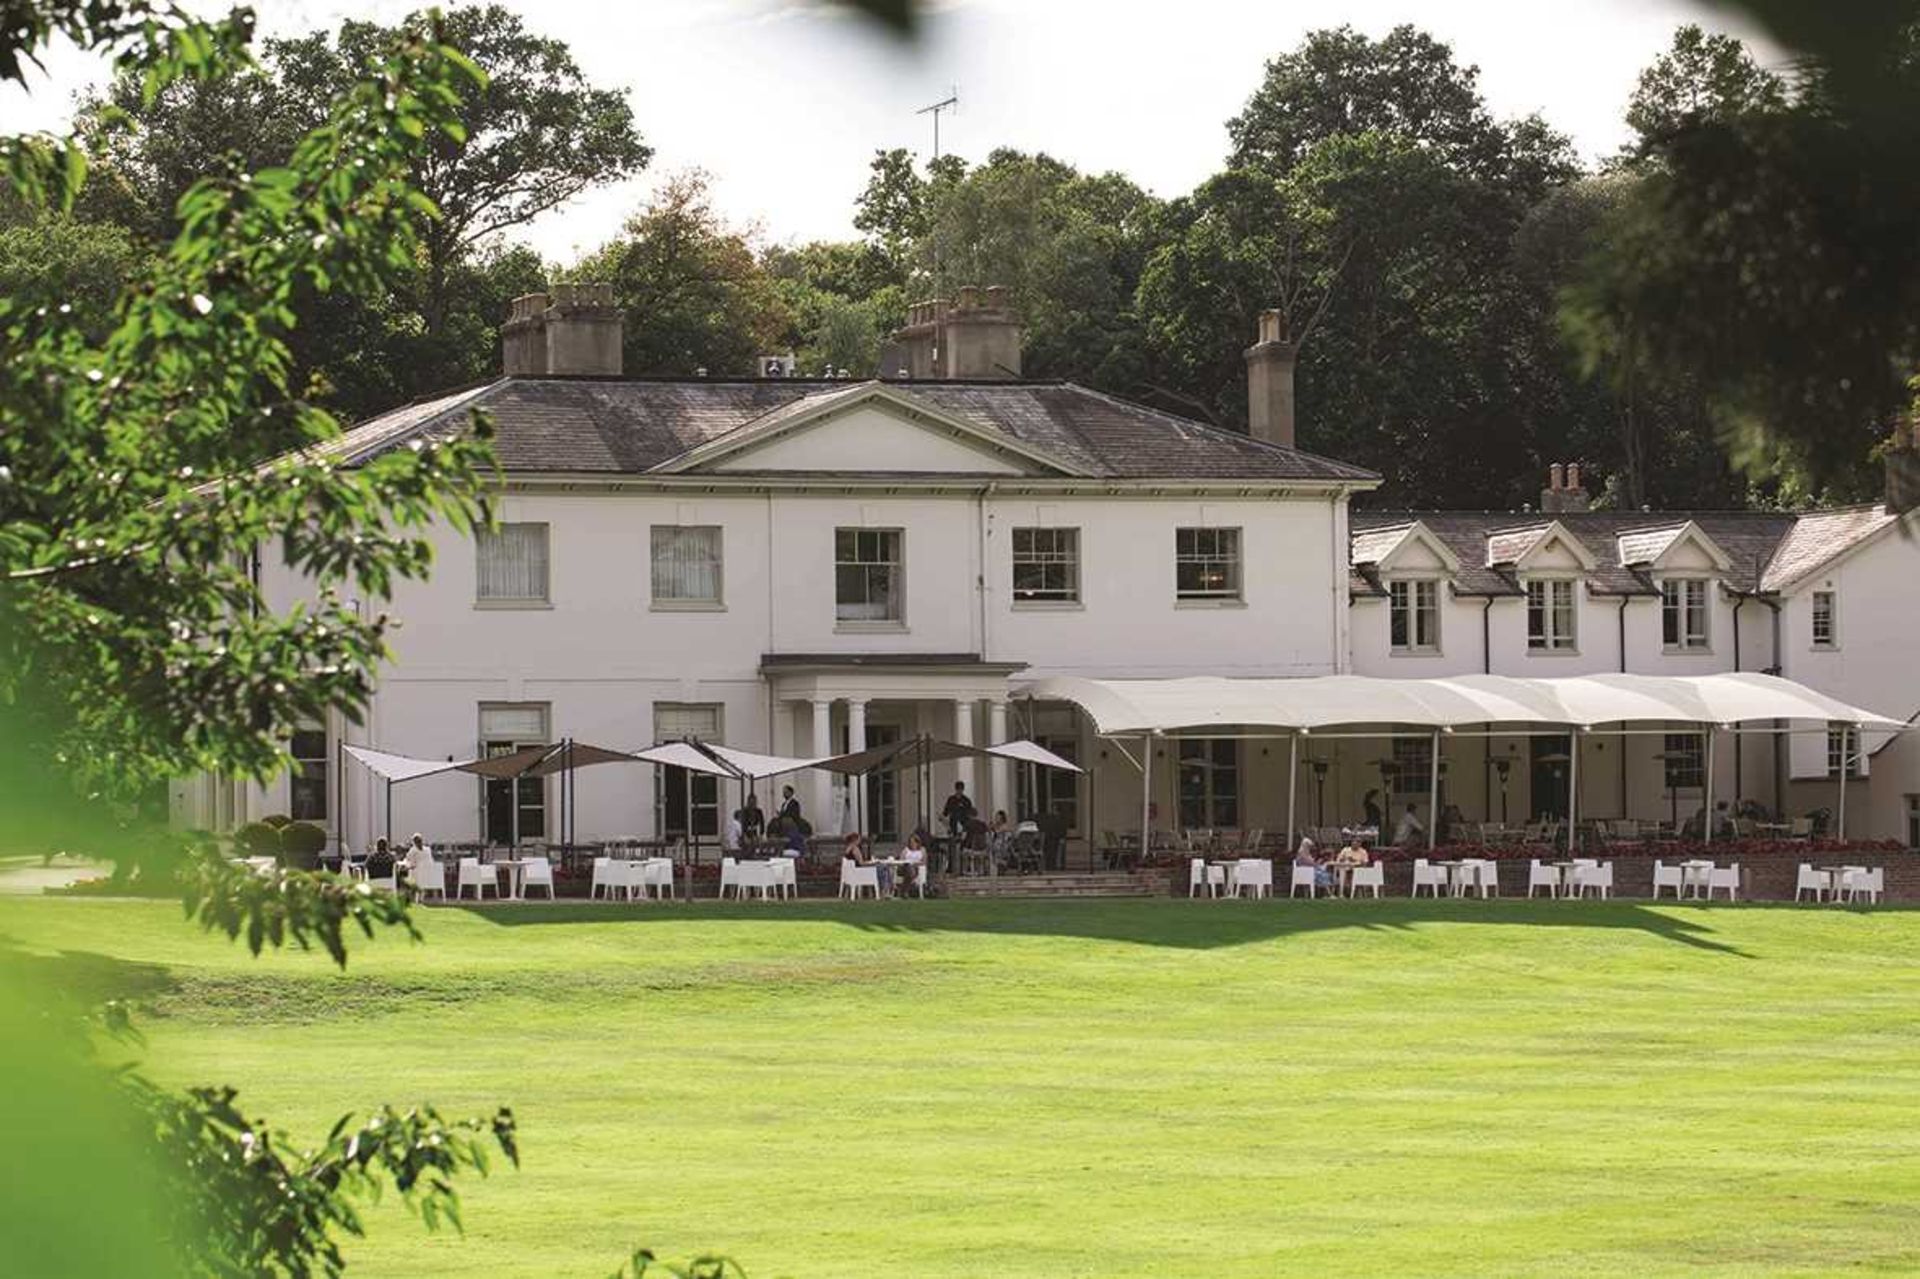 Milsoms Kesgrave Hall, Suffolk Staycation Milsoms Kesgrave Hall has specifically designed an auction